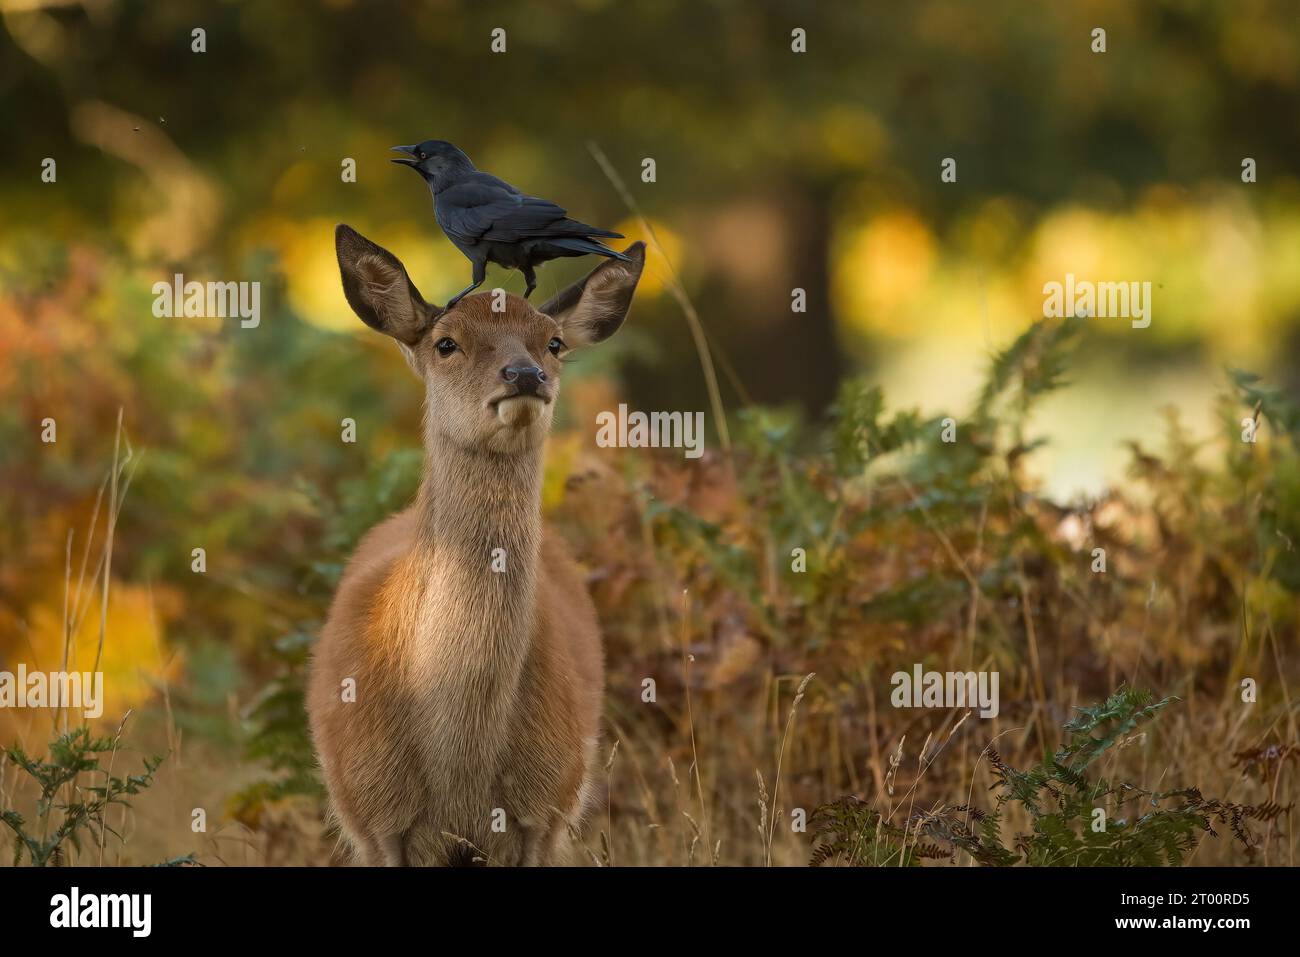 Crow on its deer lookout post MIDDLESEX ENDEARING images show a crow using the head of an adorable red deer like a lookout post.    These pictures, sn Stock Photo